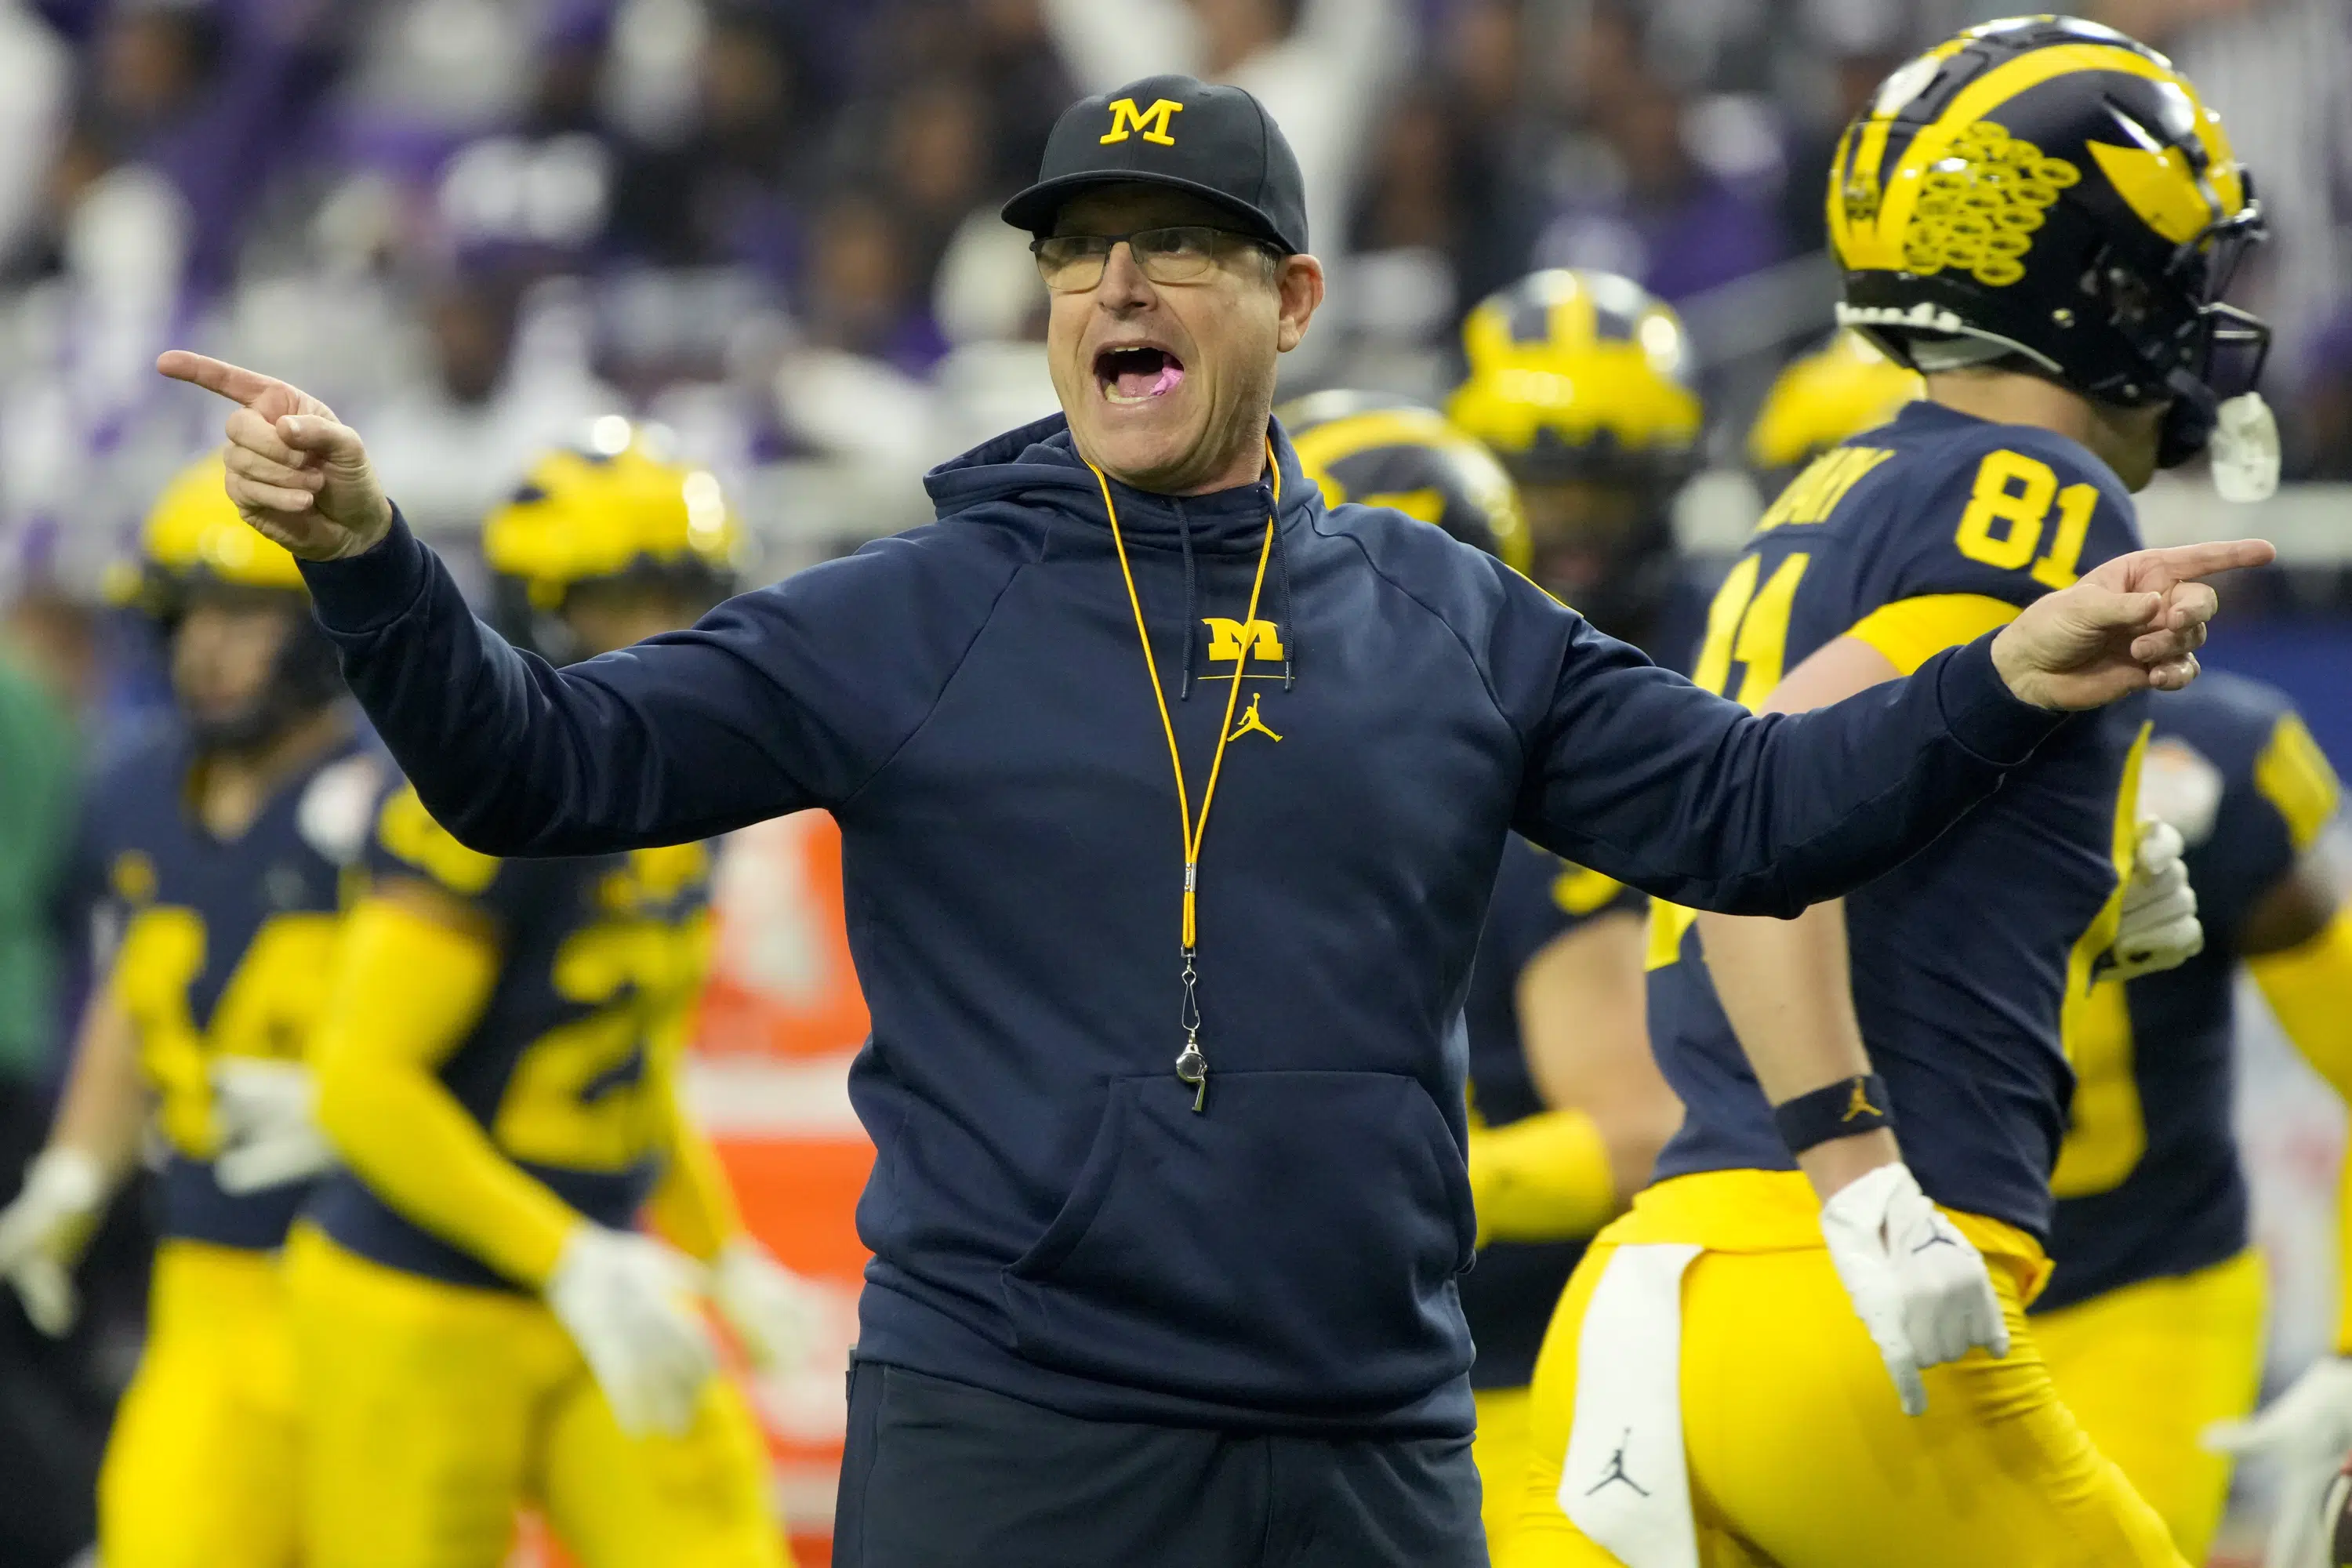 AP source: Michigan's Harbaugh refuses to agree on charge | AP News